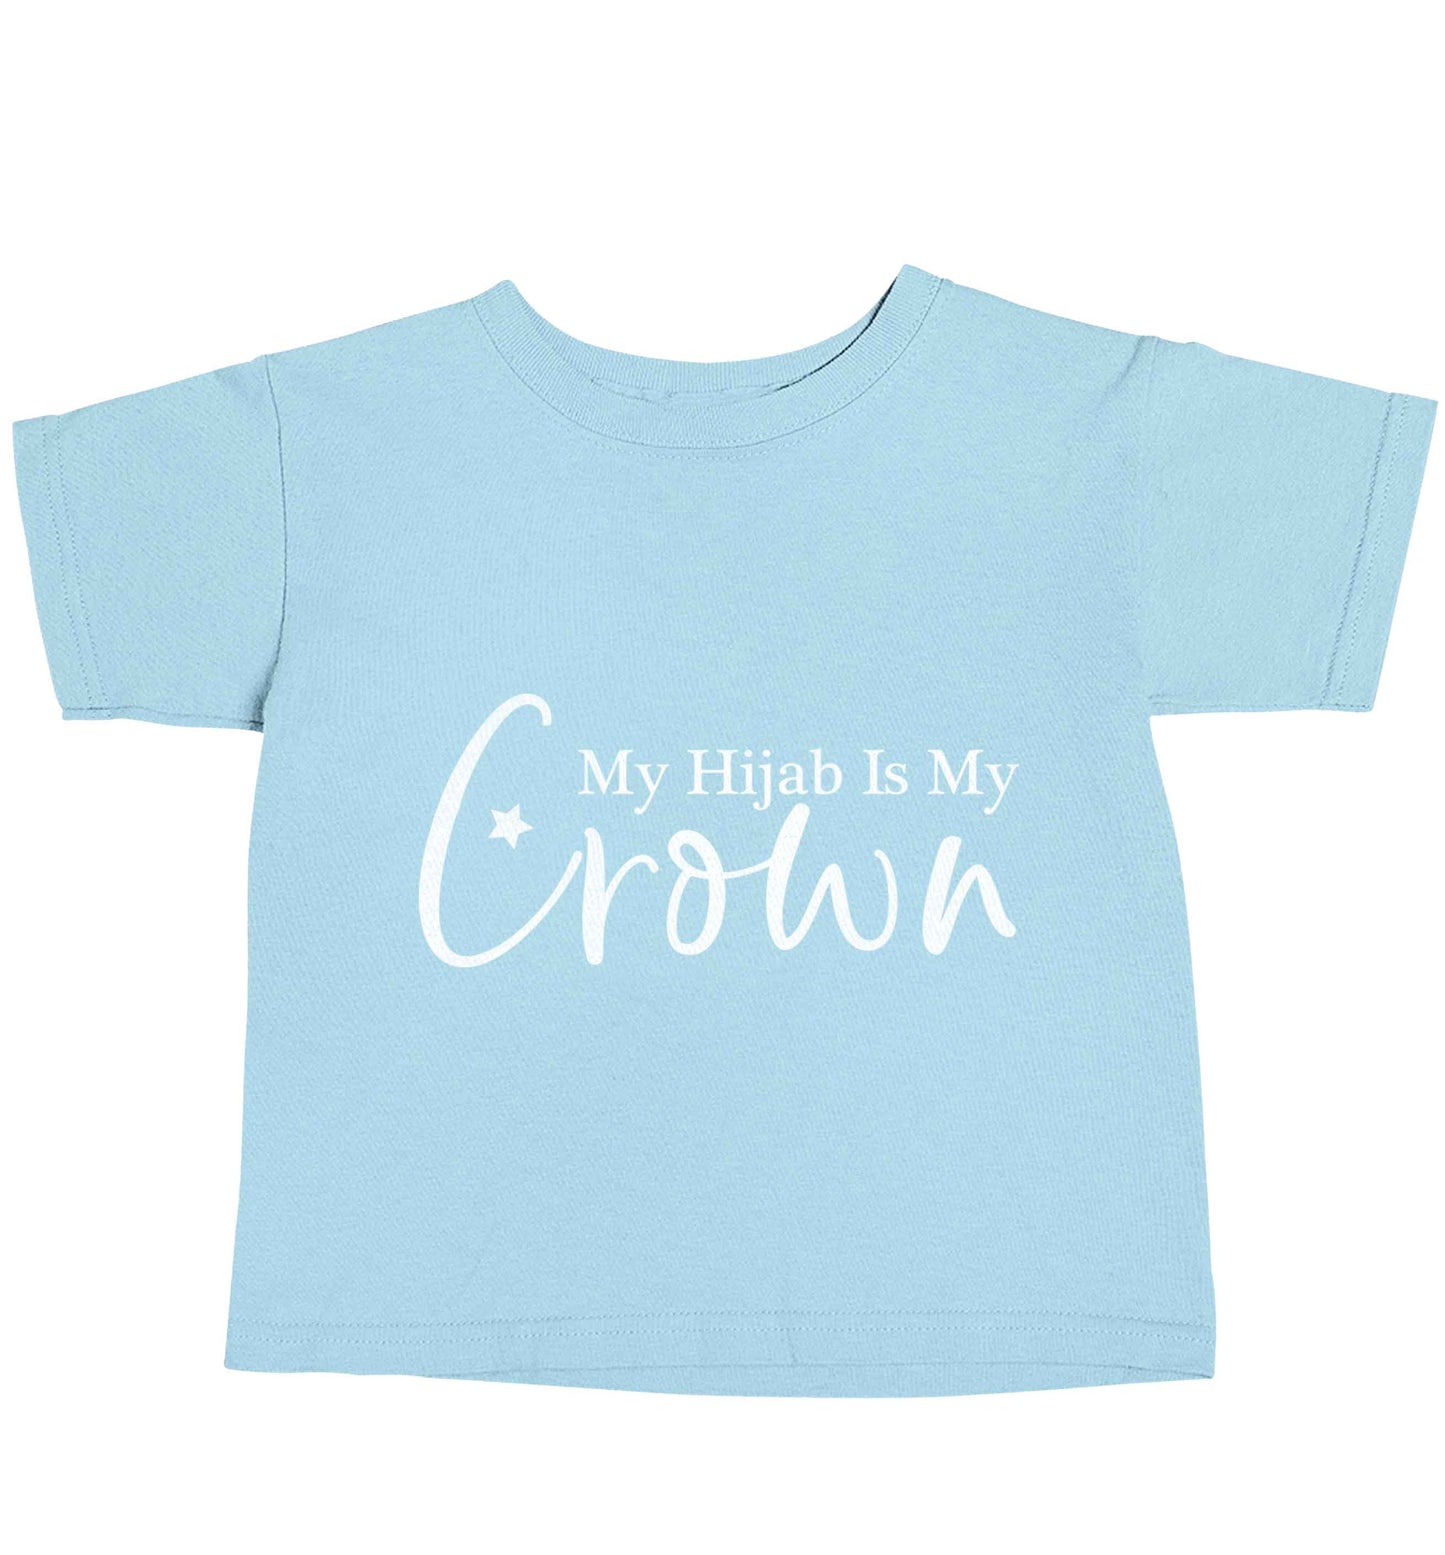 My hijab is my crown light blue baby toddler Tshirt 2 Years